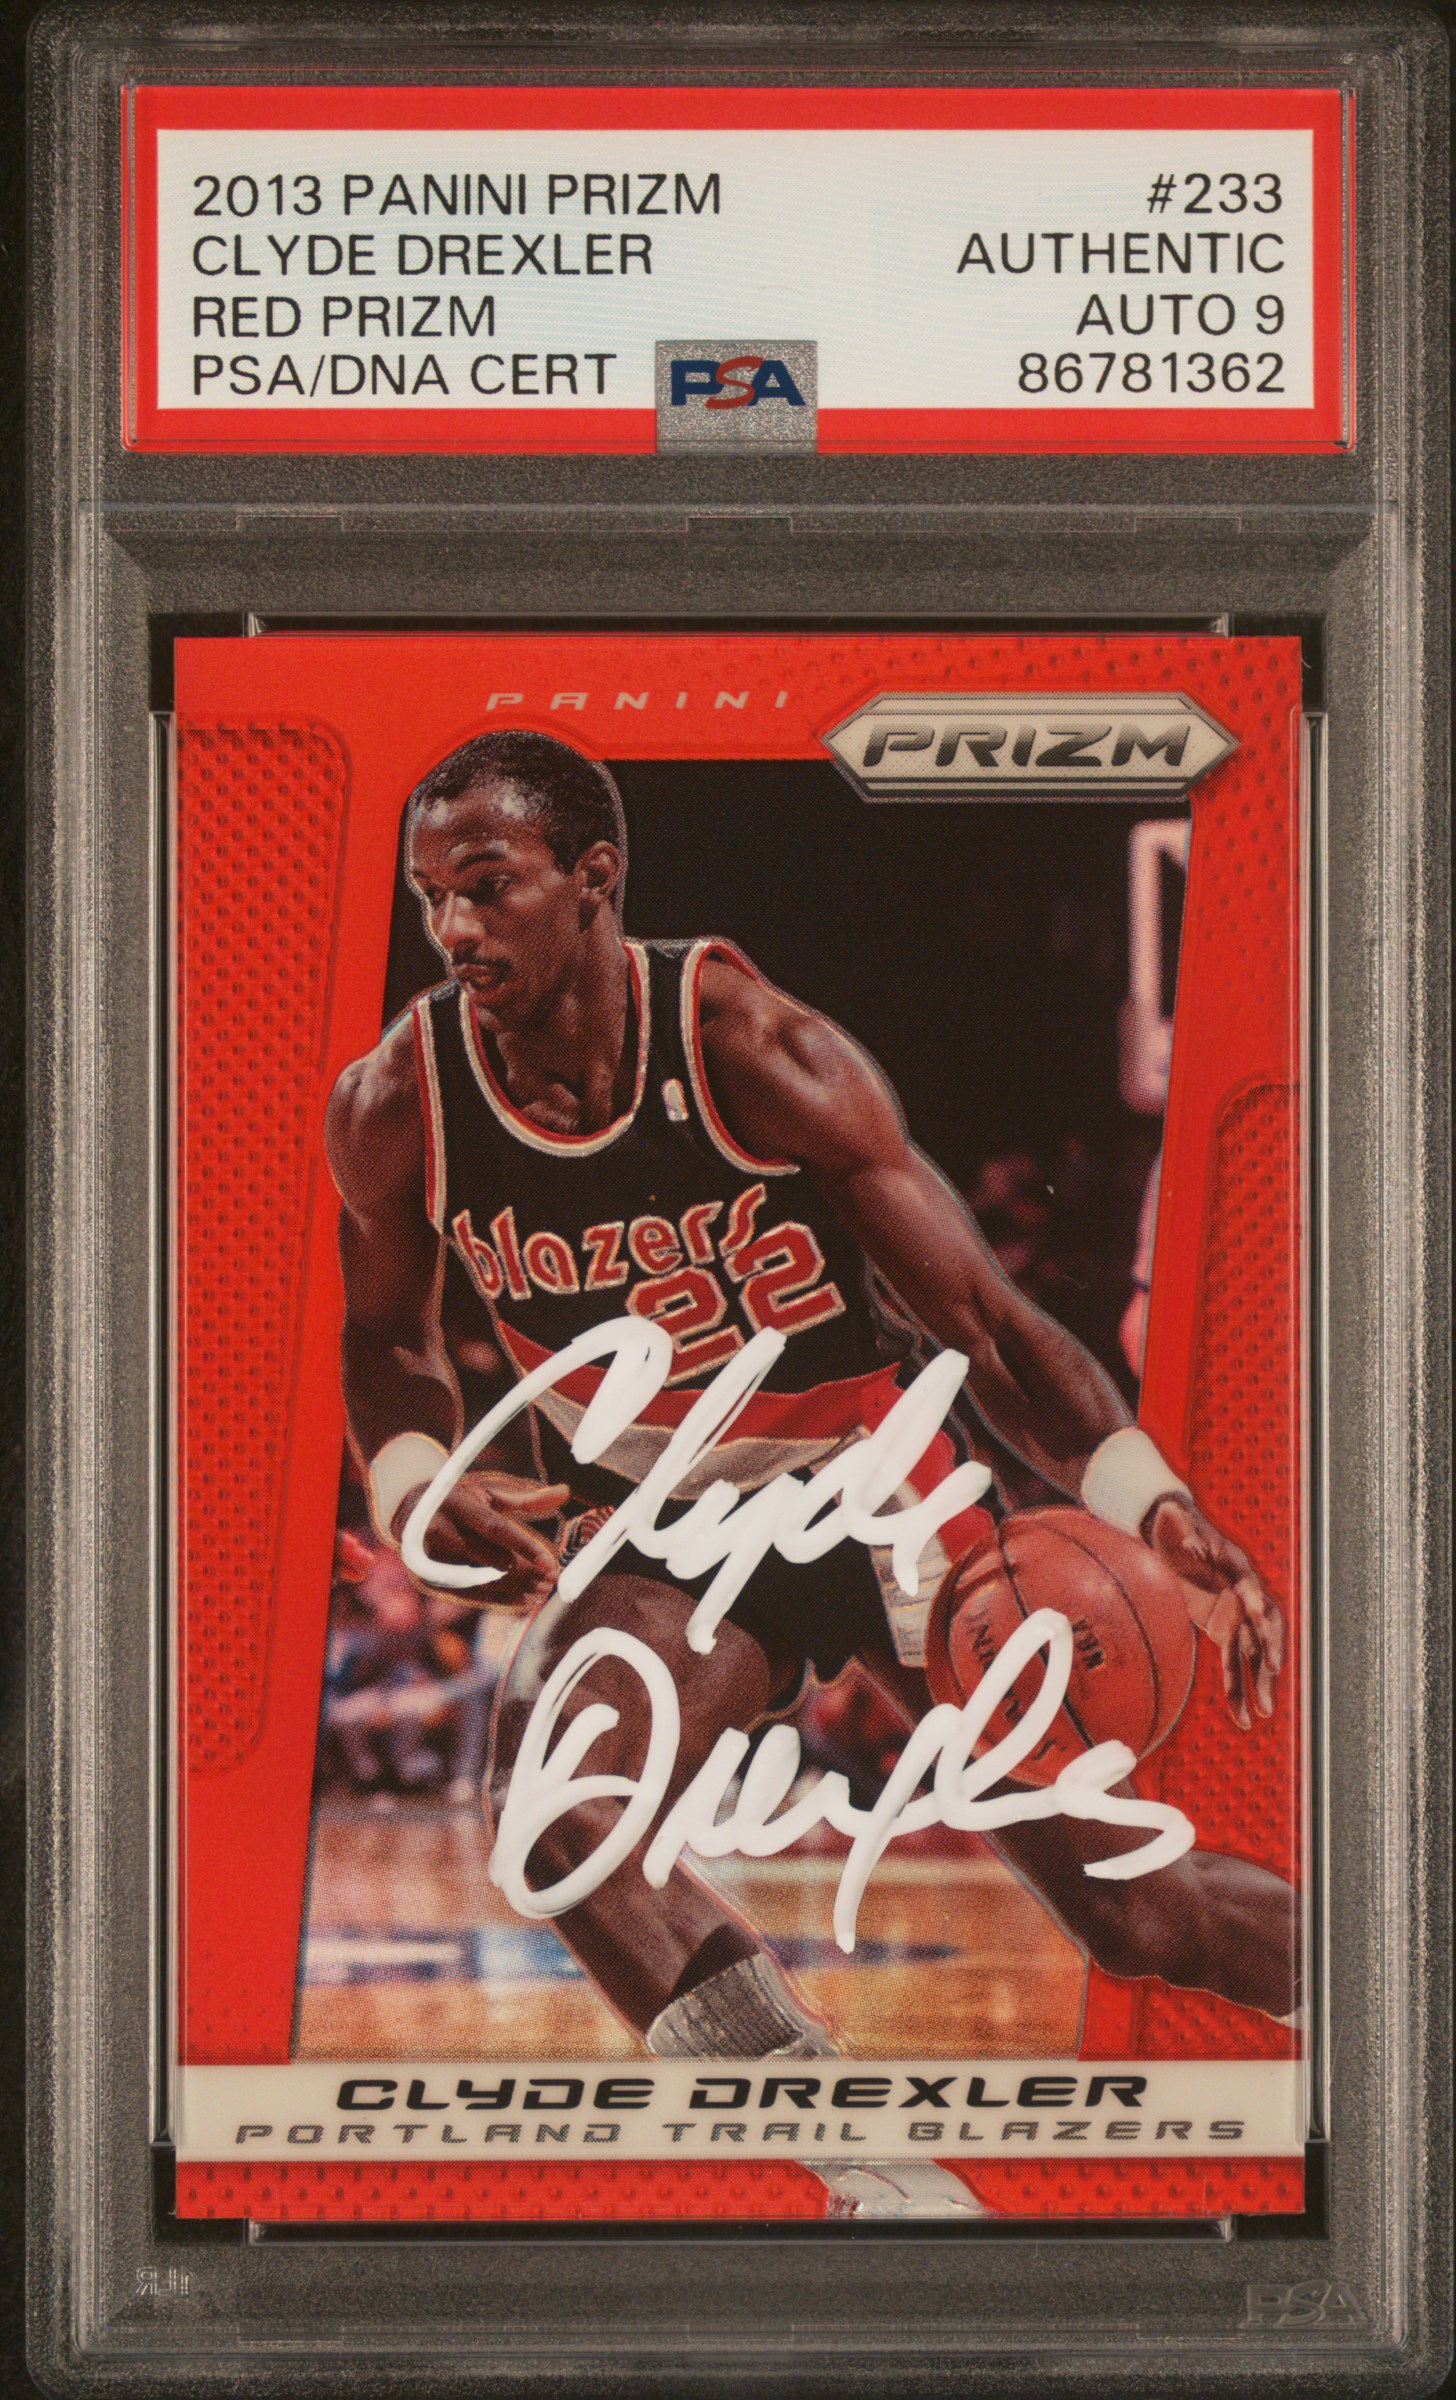 Clyde Drexler 2013 Panini Prizm Red Signed Card #233 Auto Graded PSA 9 86781362